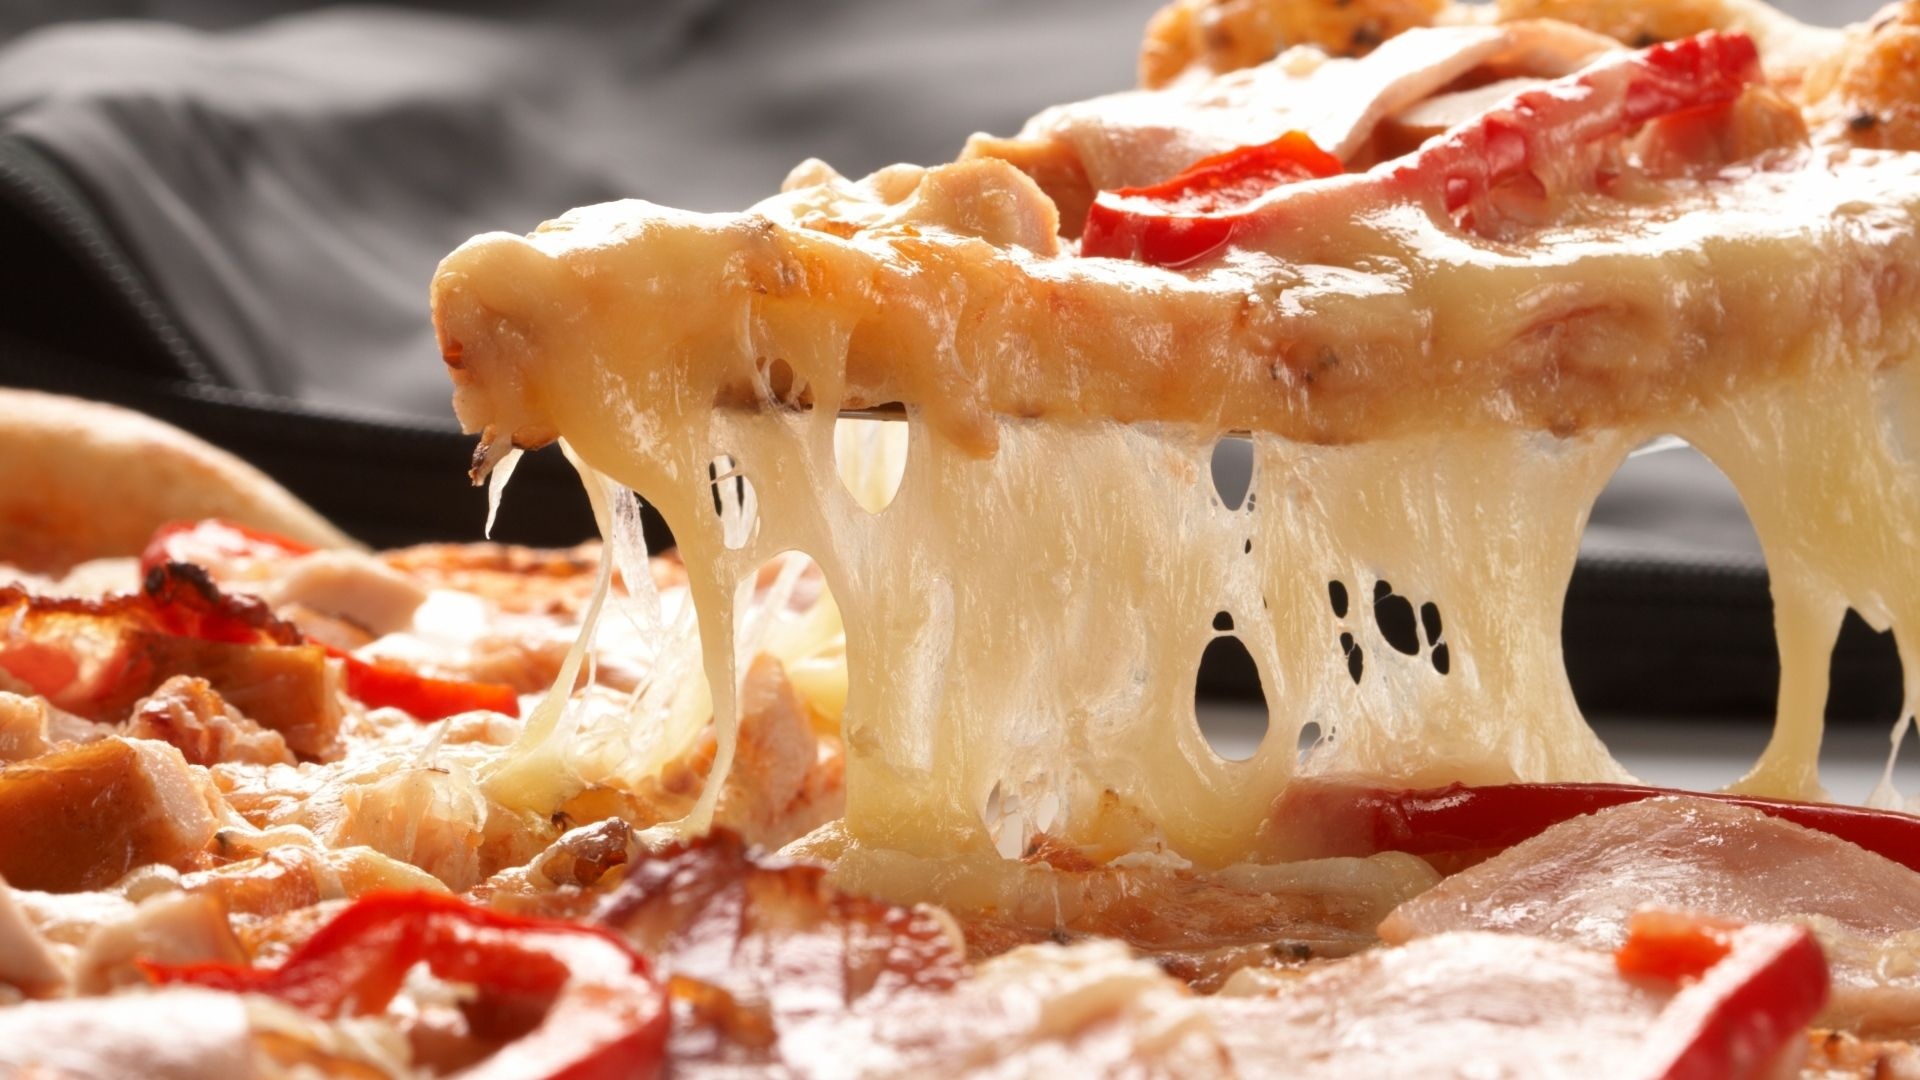 Cheese: Mozzarella is commonly used on pizzas, Italian cuisine. 1920x1080 Full HD Wallpaper.